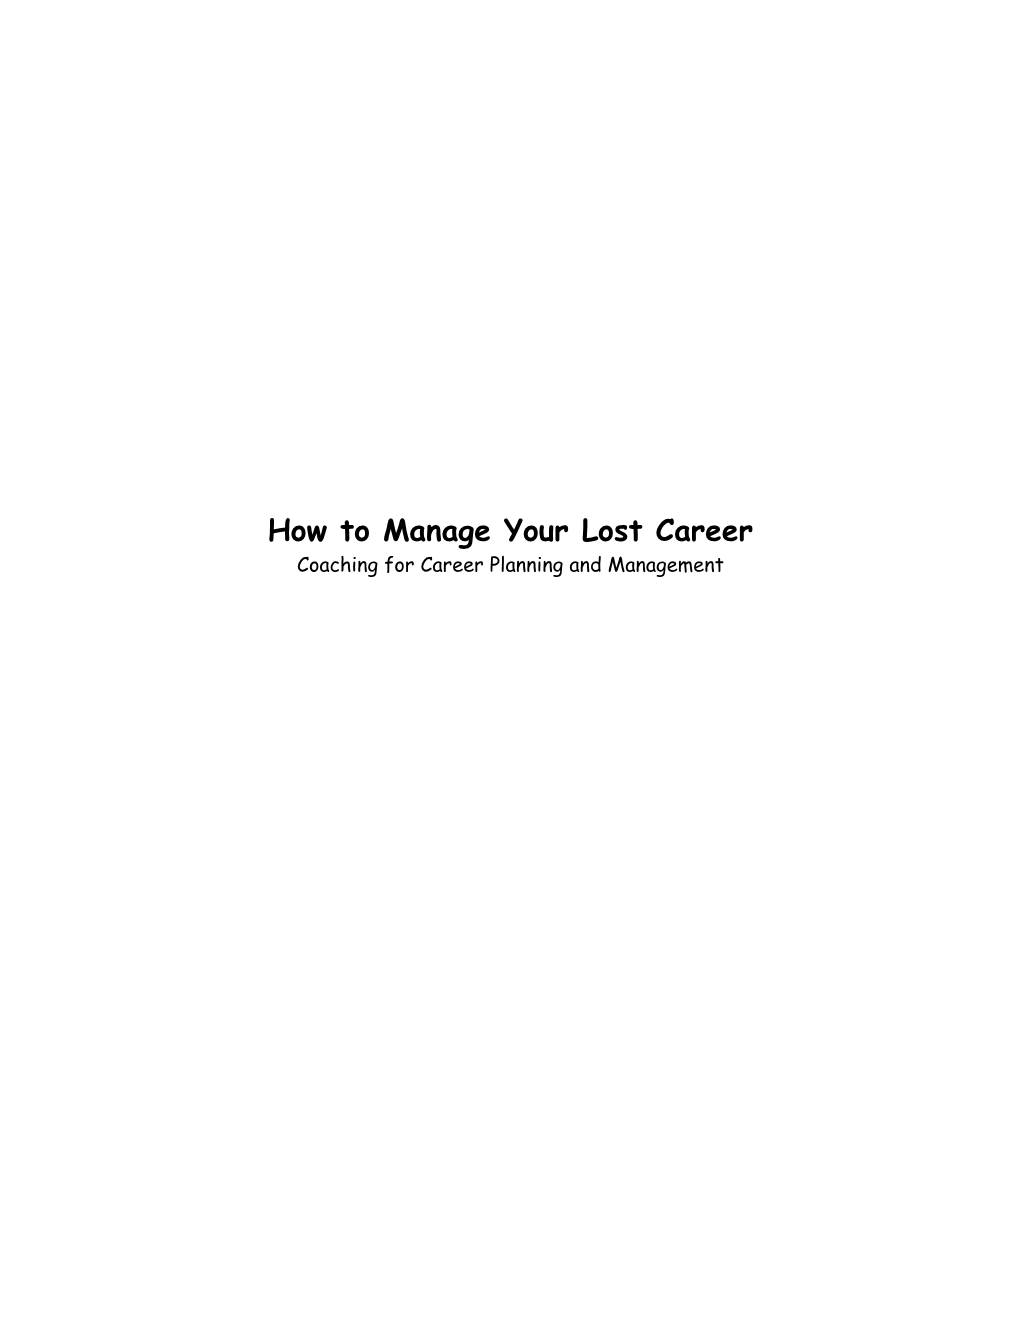 How to Manage Your Lost Career